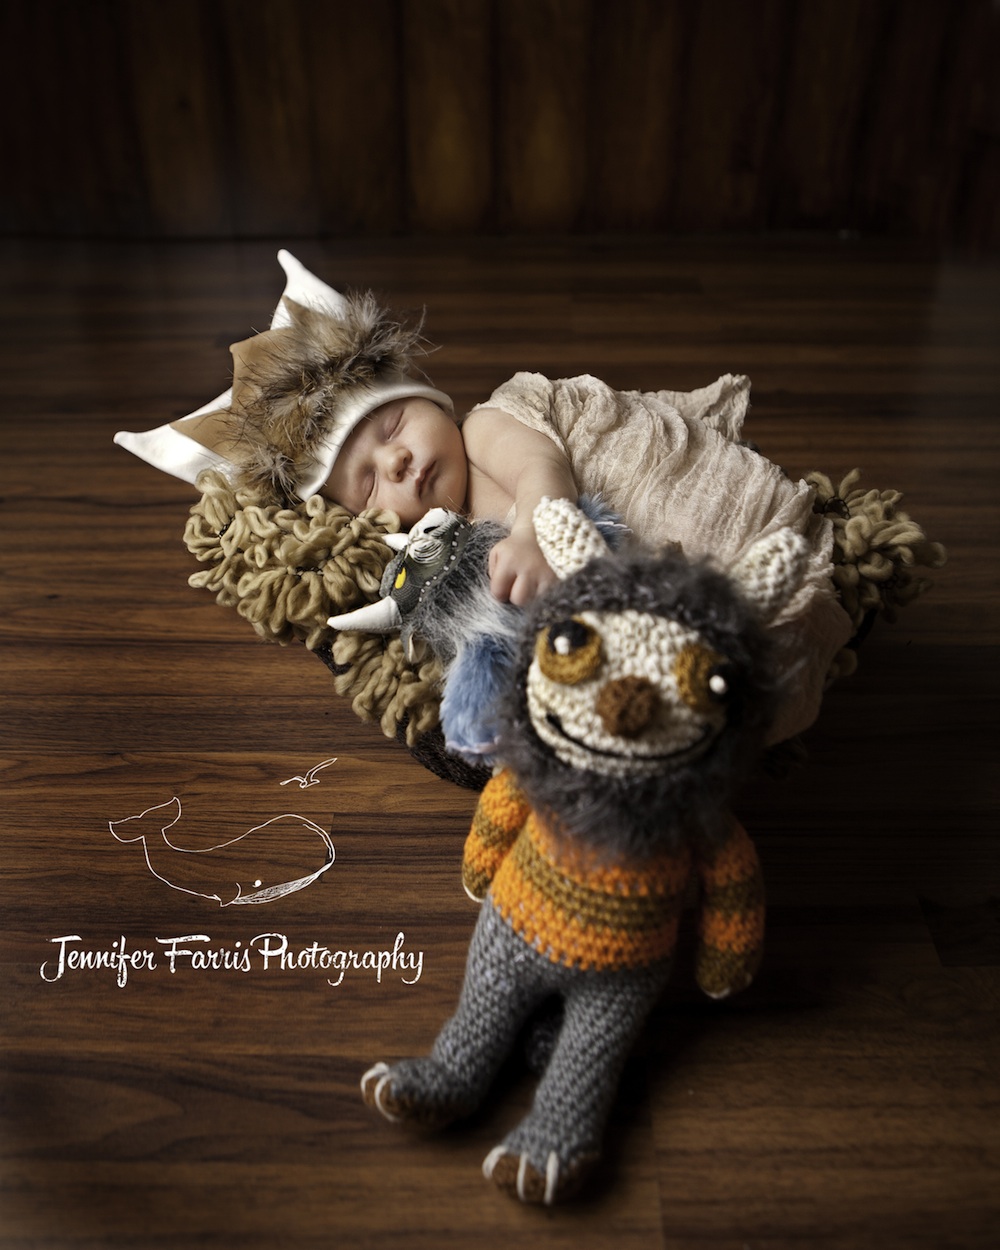  Where the Wild Things Are Themed Newborn Photo Session with Bernard and a crocheted Moishe | Jennifer Farris Photography | as seen on GiggleHearts.com 